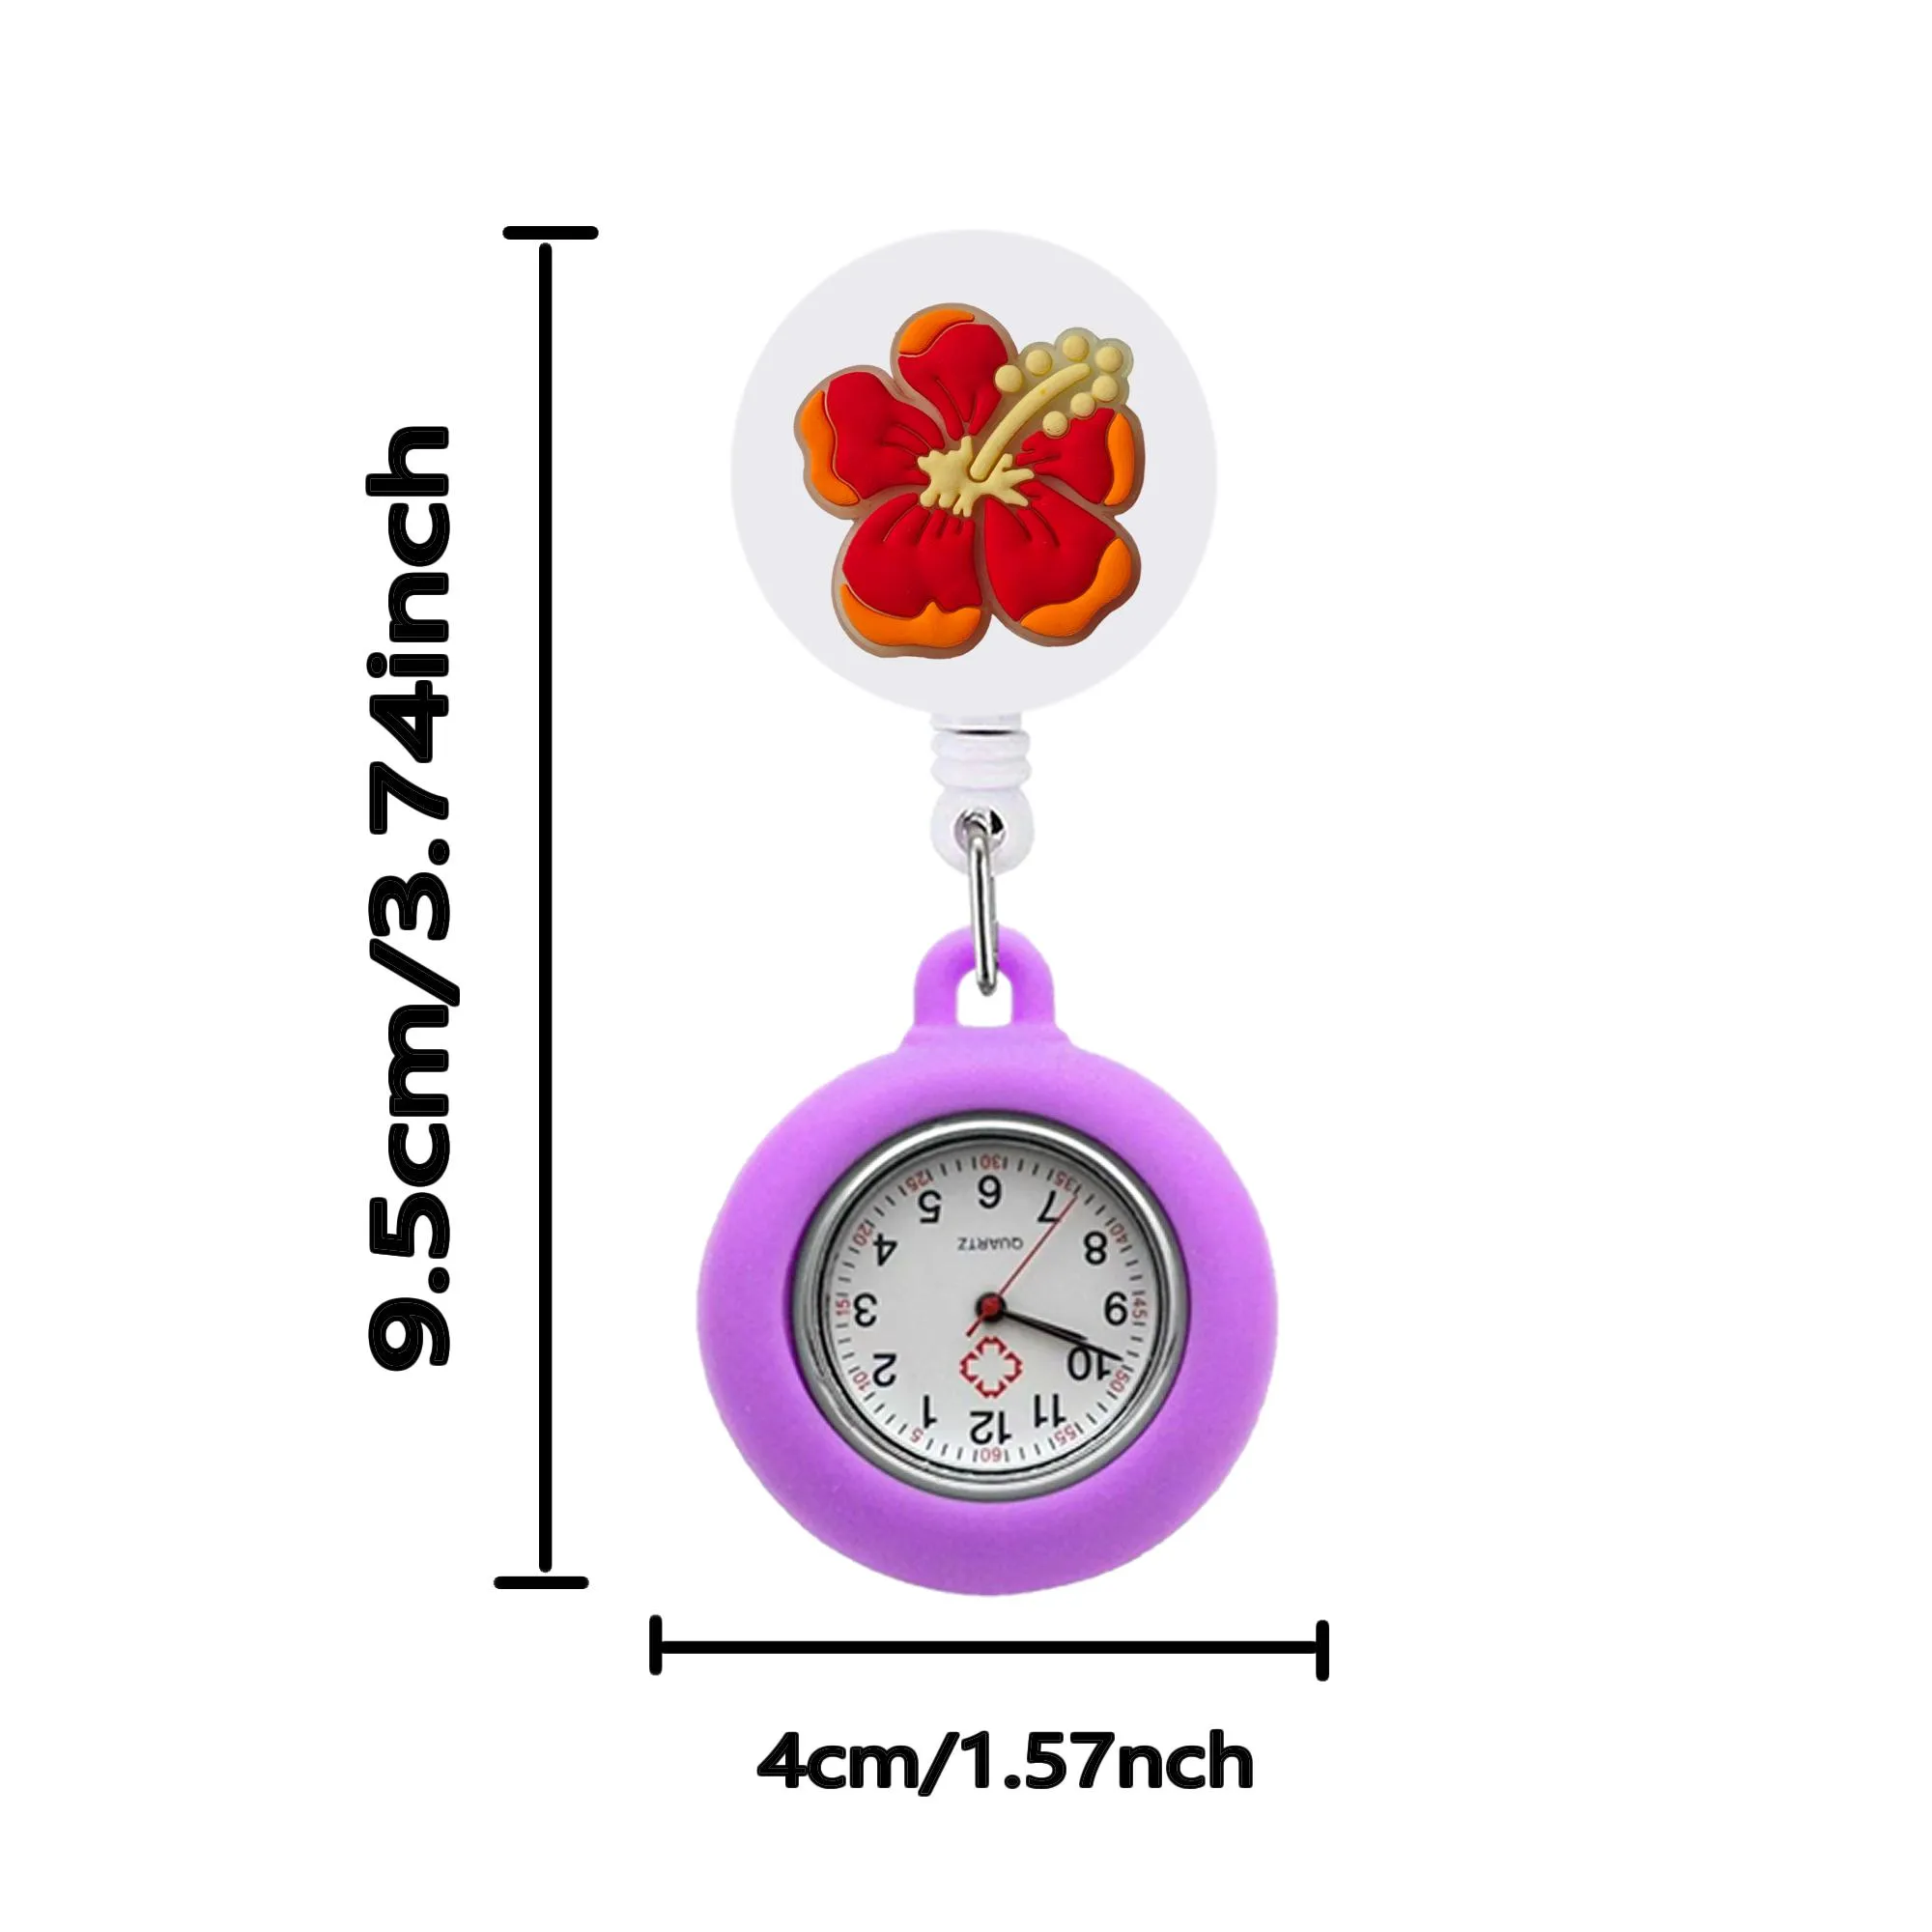 fluorescent pentapetal flower clip pocket watches medical hang clock gift retractable arabic numeral dial nurse watch brooch quartz movement stethoscope fob silicone